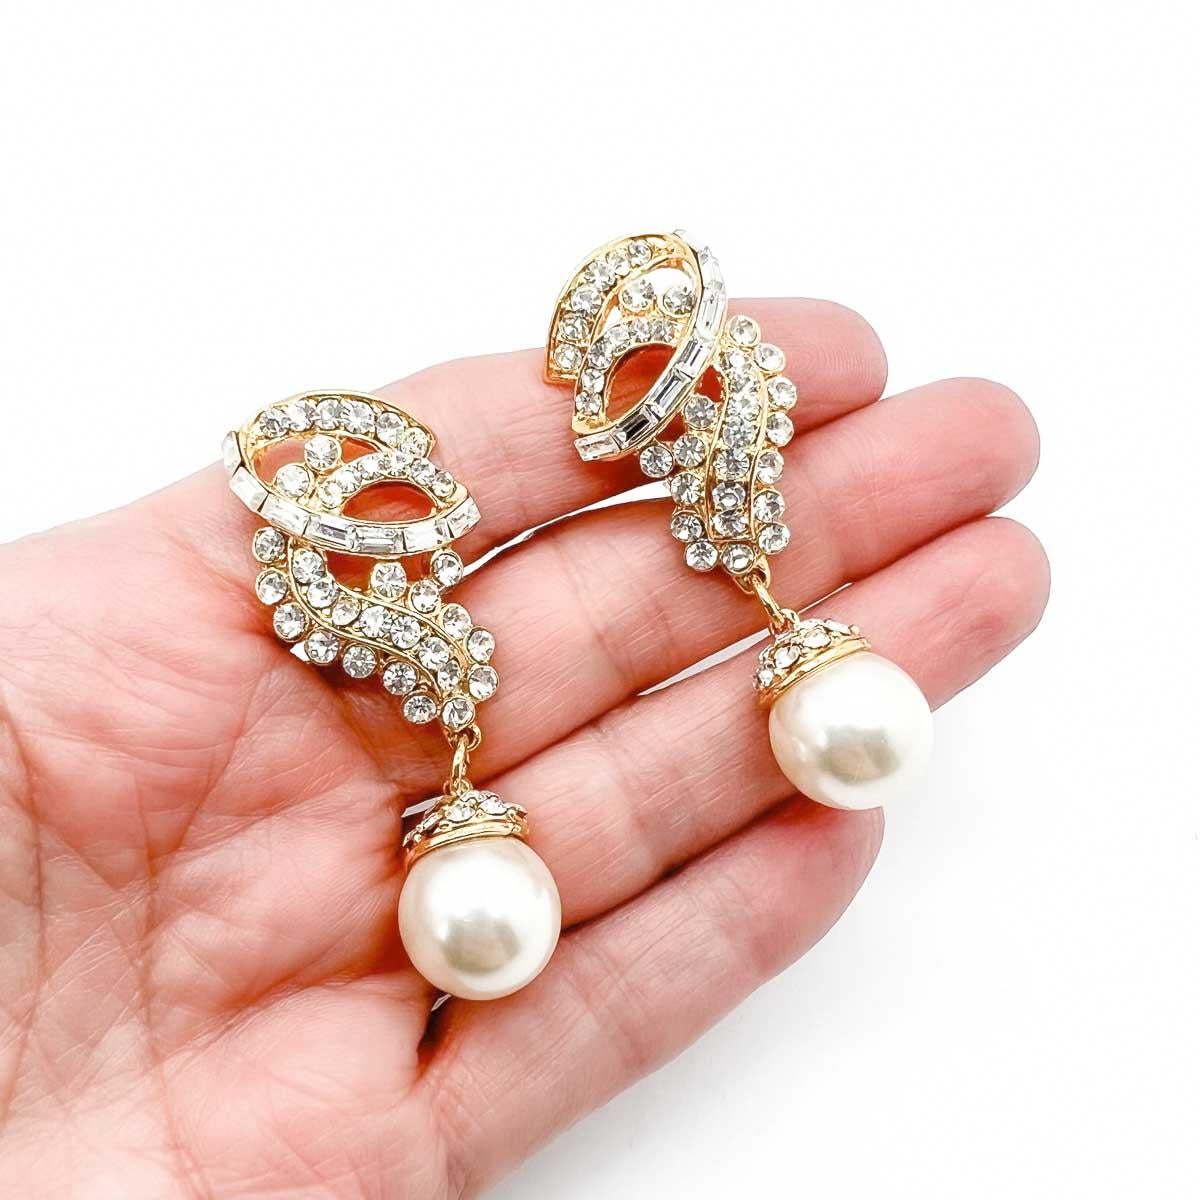 Vintage Diana Pearl Twist Earrings. Entitled 'Diana' as they are reminiscent of the style of earrings Catherine, Princess of Wales inherited from Princess Diana's jewellery collection and wears frequently.
An unsigned beauty. A rare treasure. Just